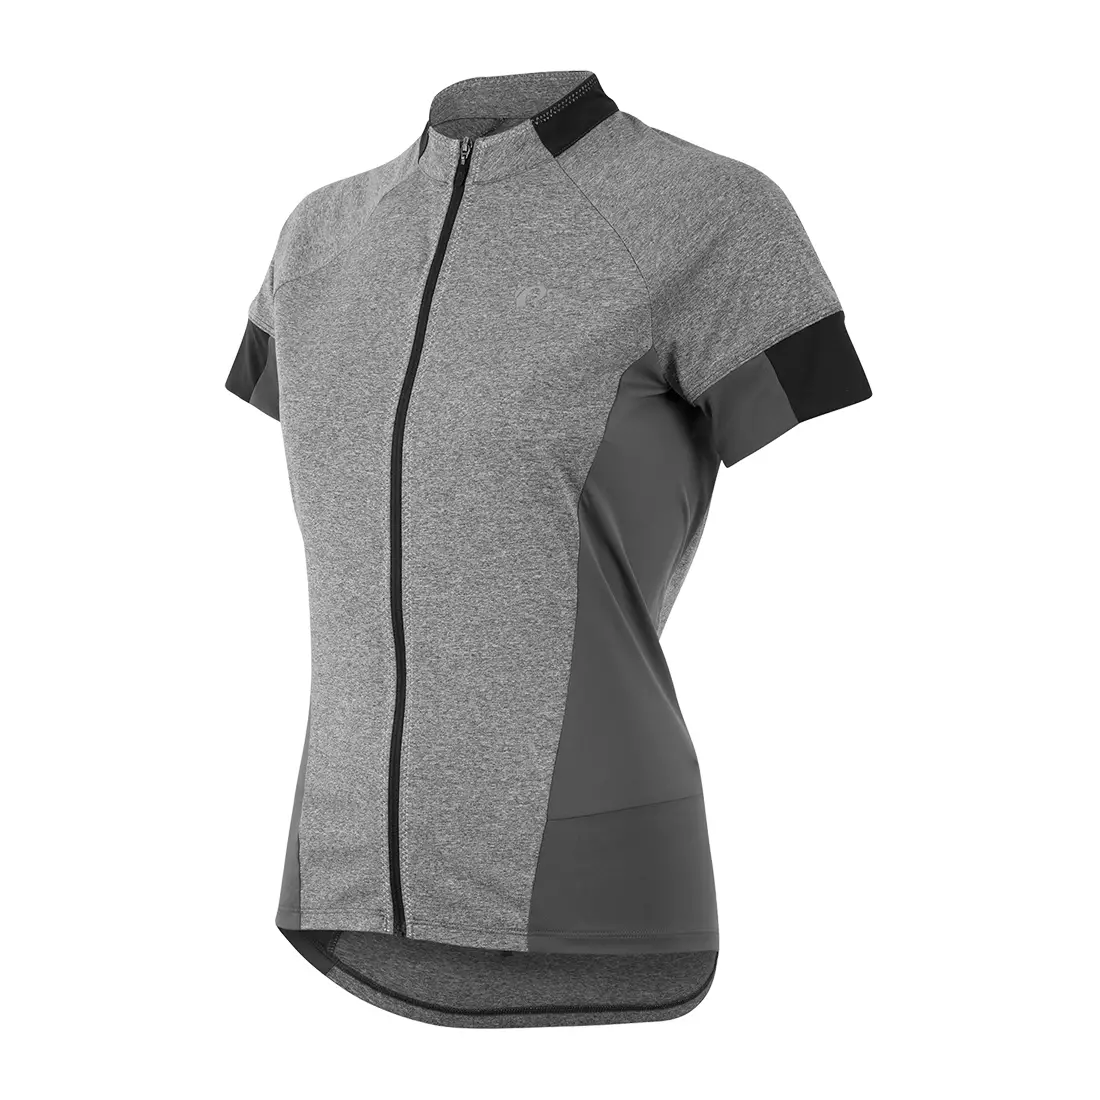 PEARL IZUMI women's cycling jersey Select ESCAPE 11221630-5LP Smoked Pearl Parquet